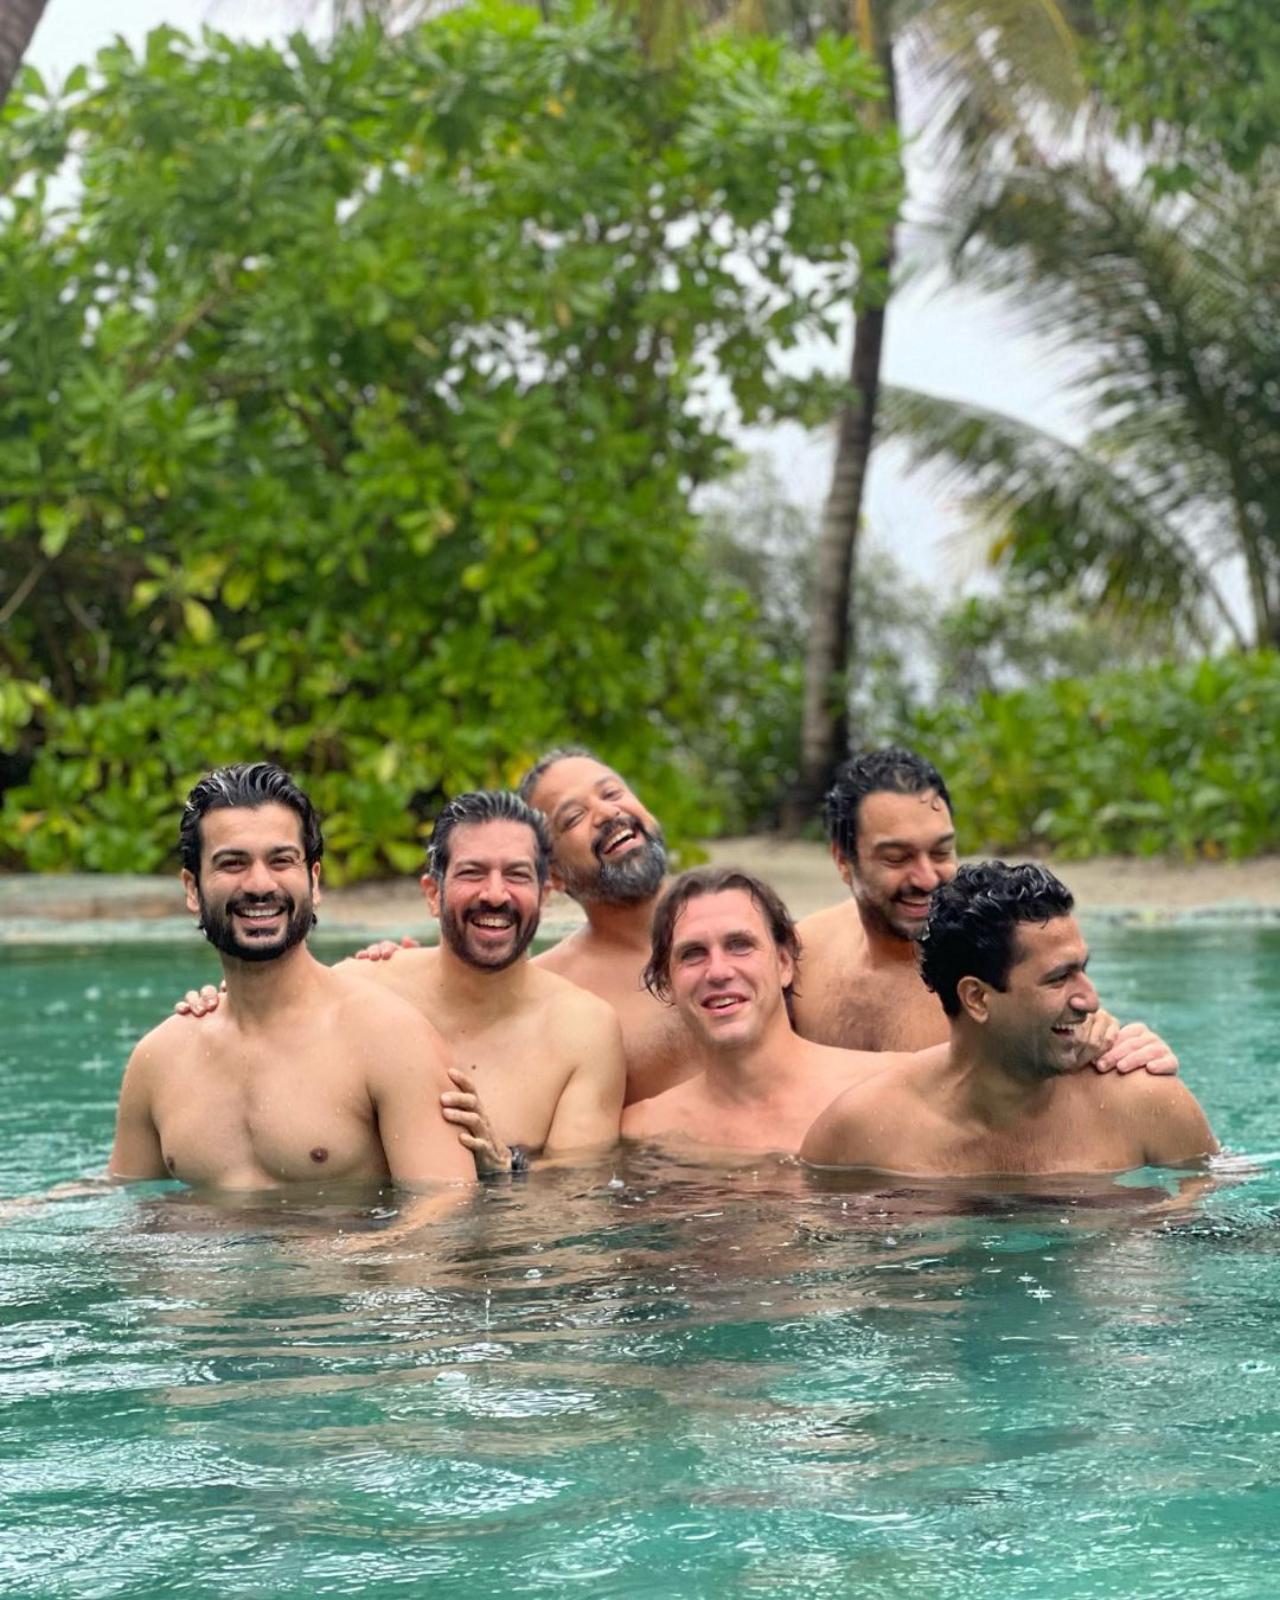 Vicky also shared a couple of pictures with his boy gang in the pool. In the pictures, he can be seen posing in a pool with Sunny Kaushal, Anand Tiwari, Kabir Khan, and Katrina's brother